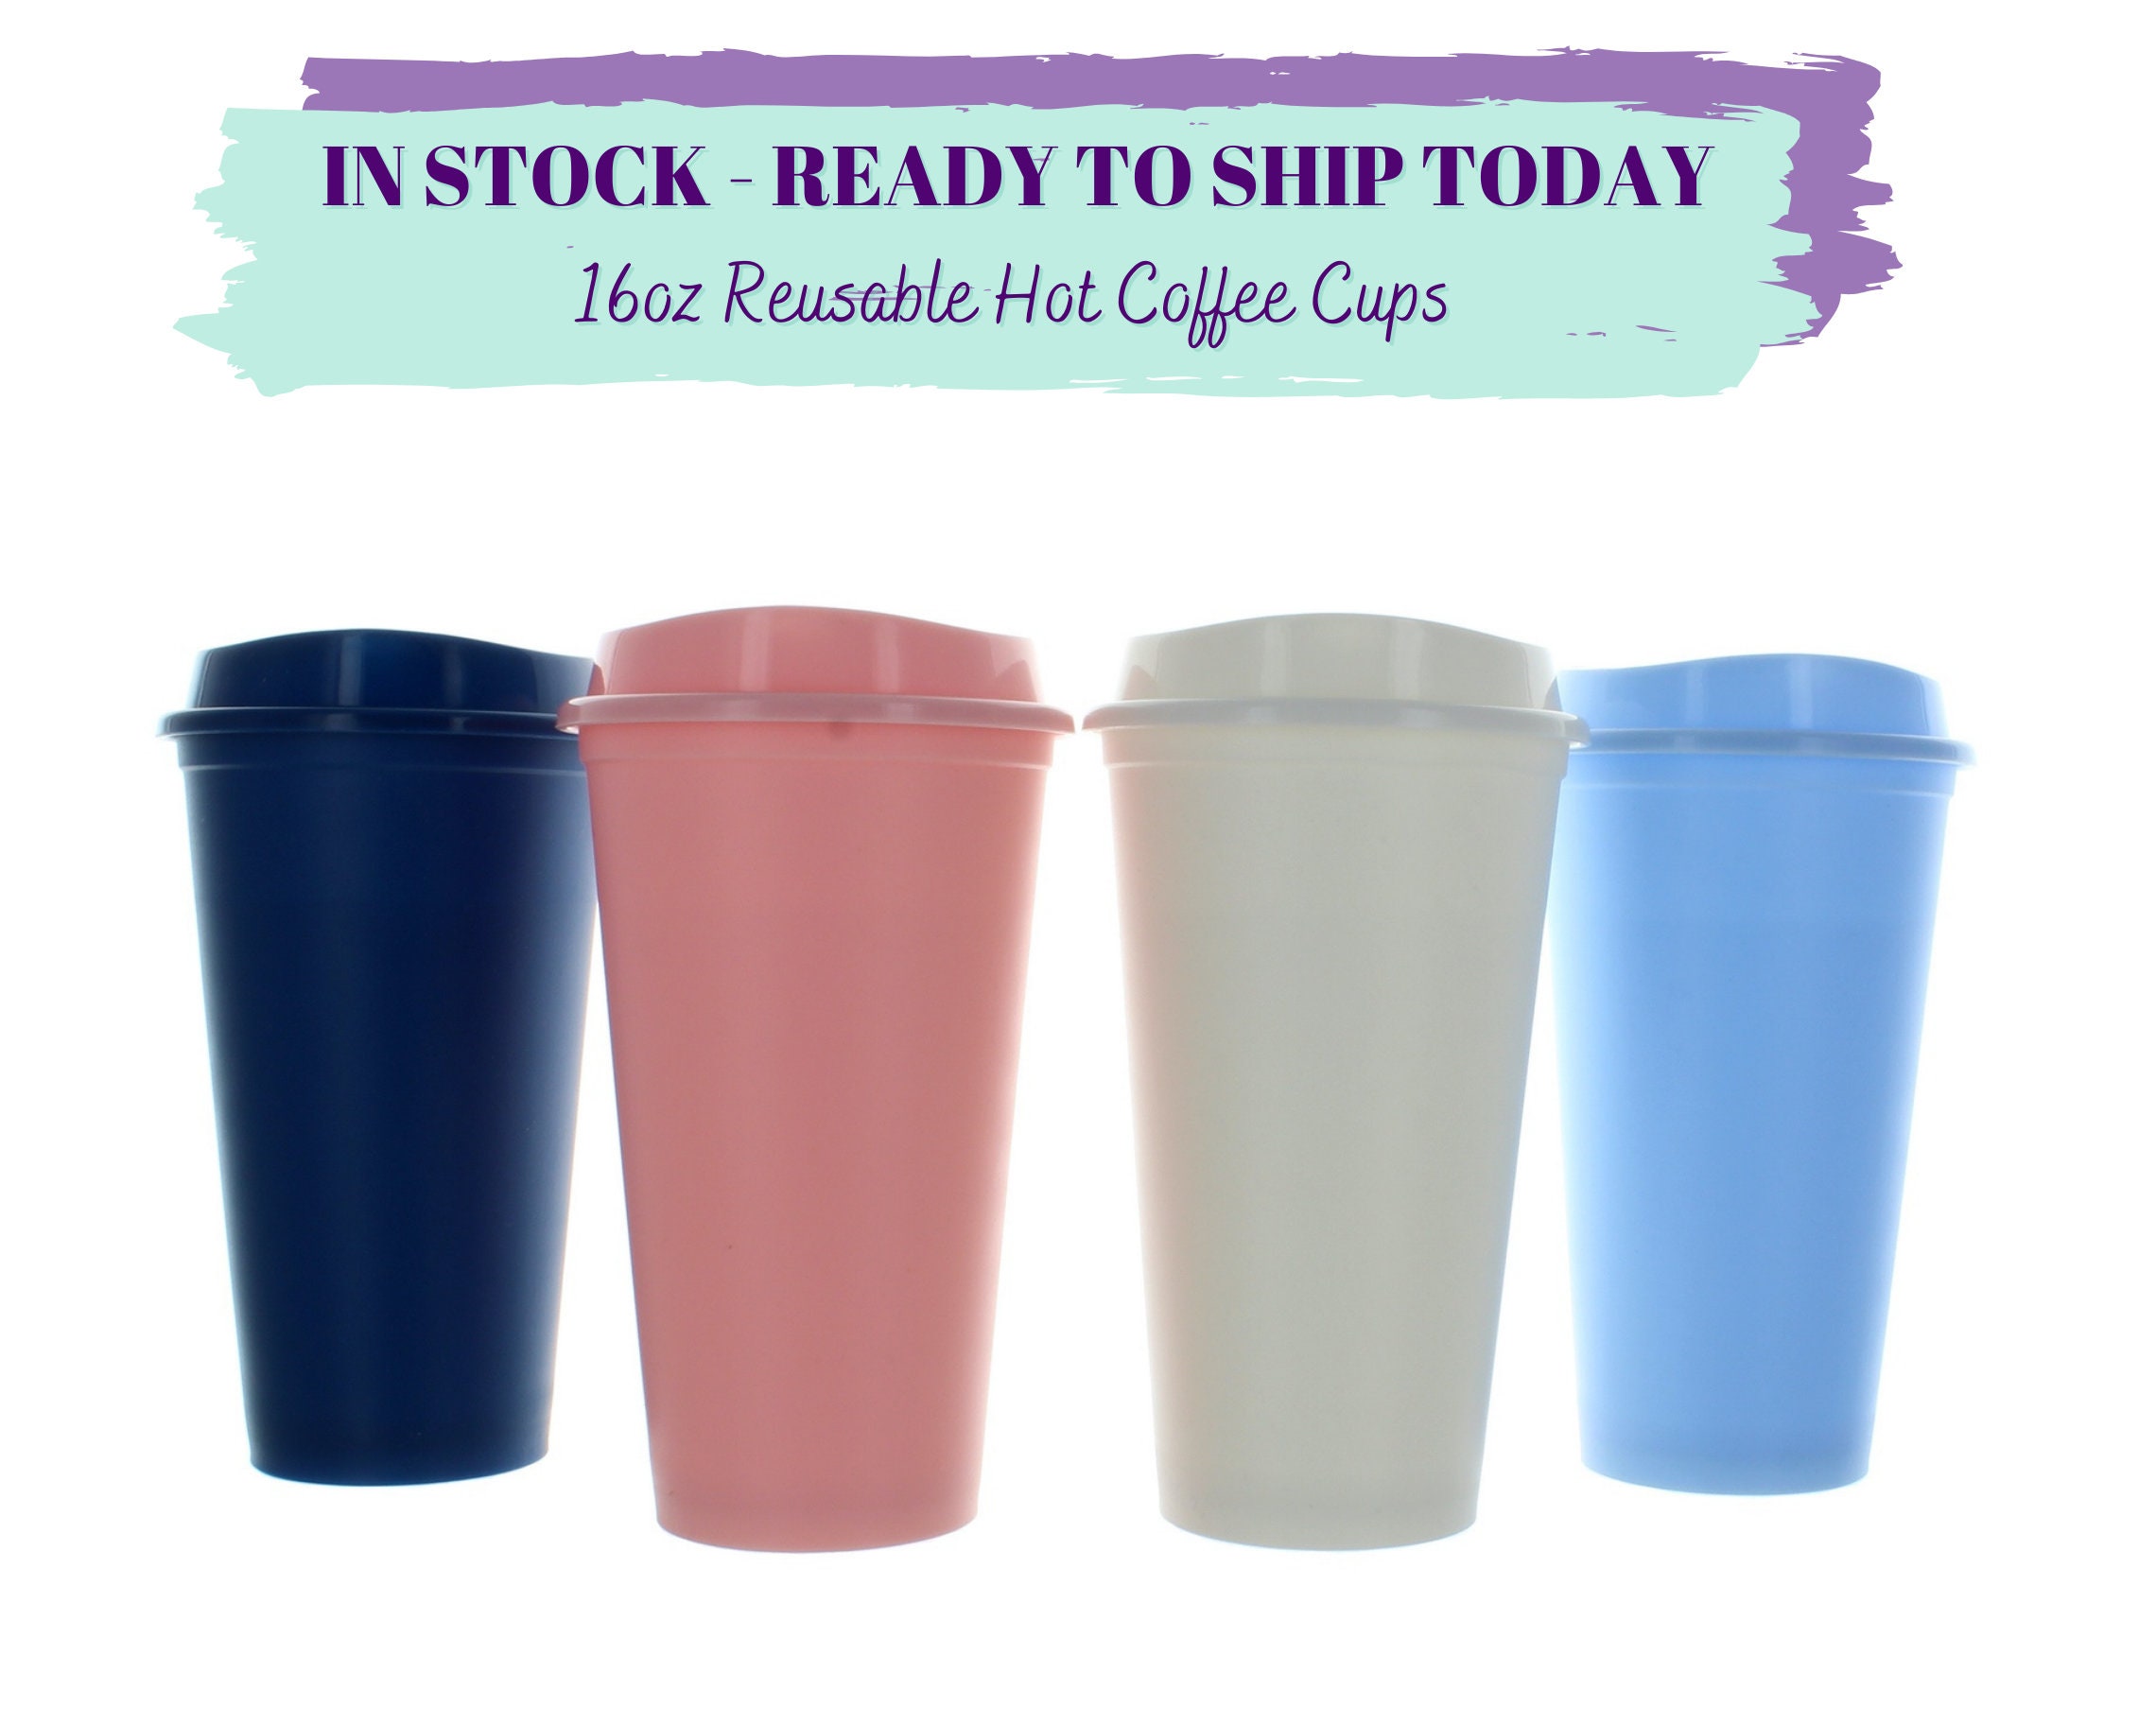 16oz Reusable Hot Coffee Cups Plastic Travel Cups Tumbler Cup